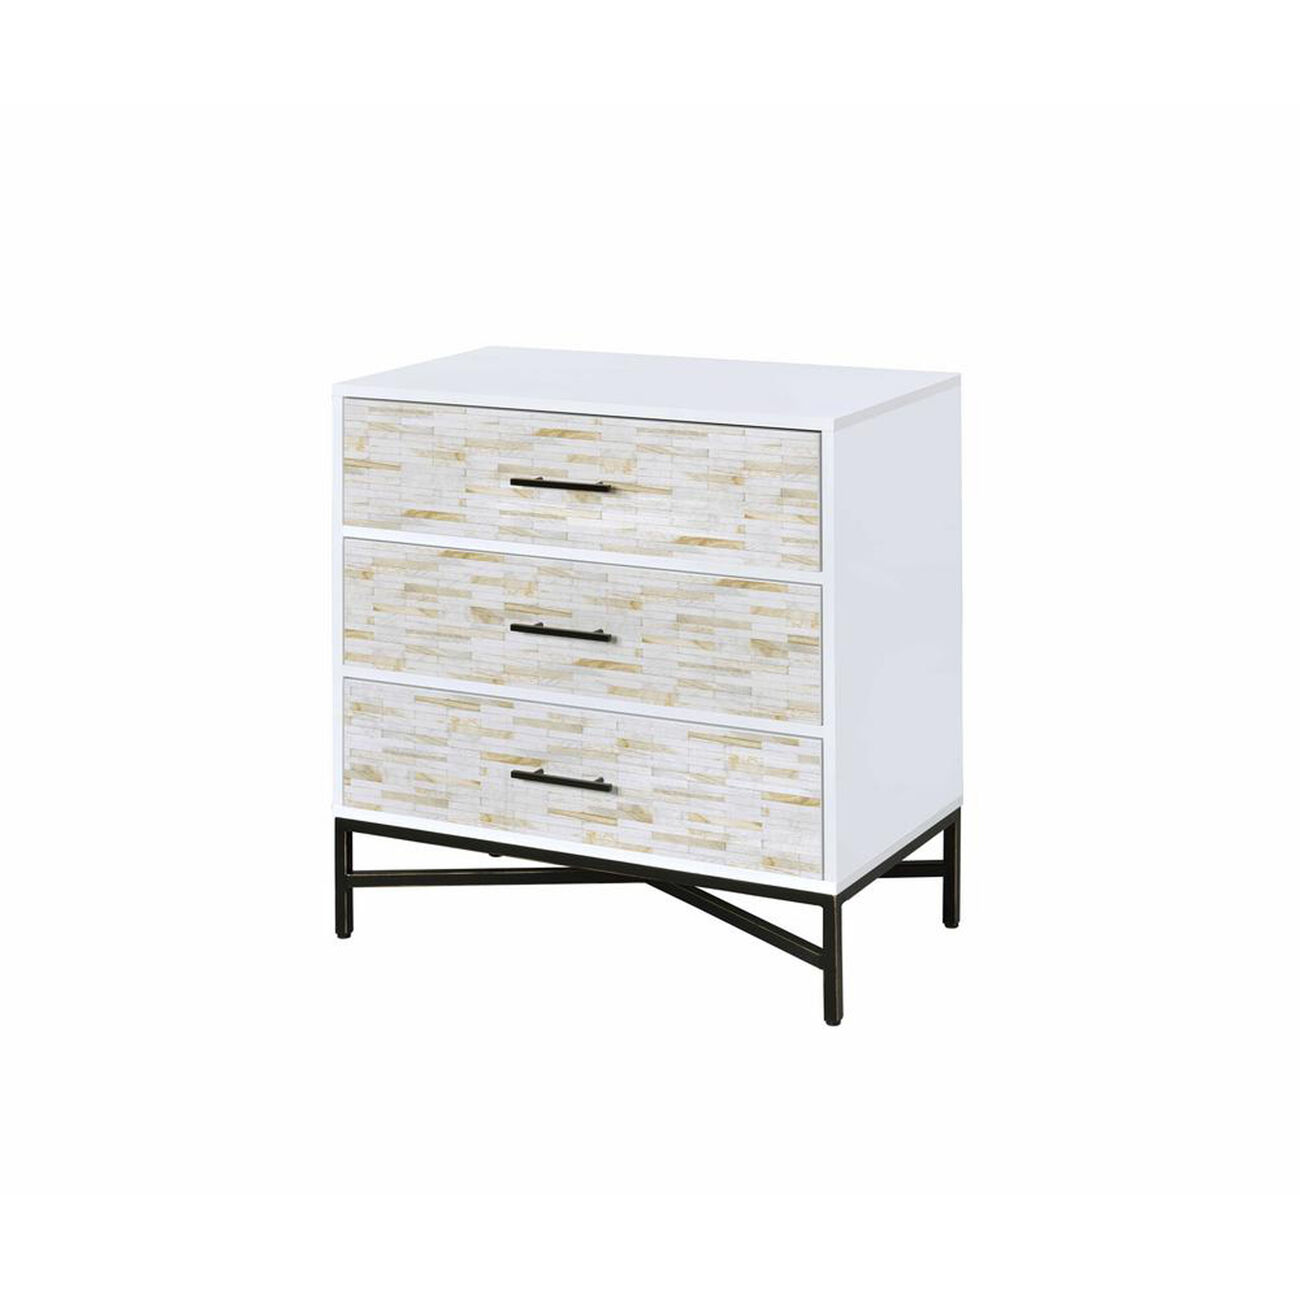 Patterned Three Drawers Wooden Console Table with Metal Base, White & Black